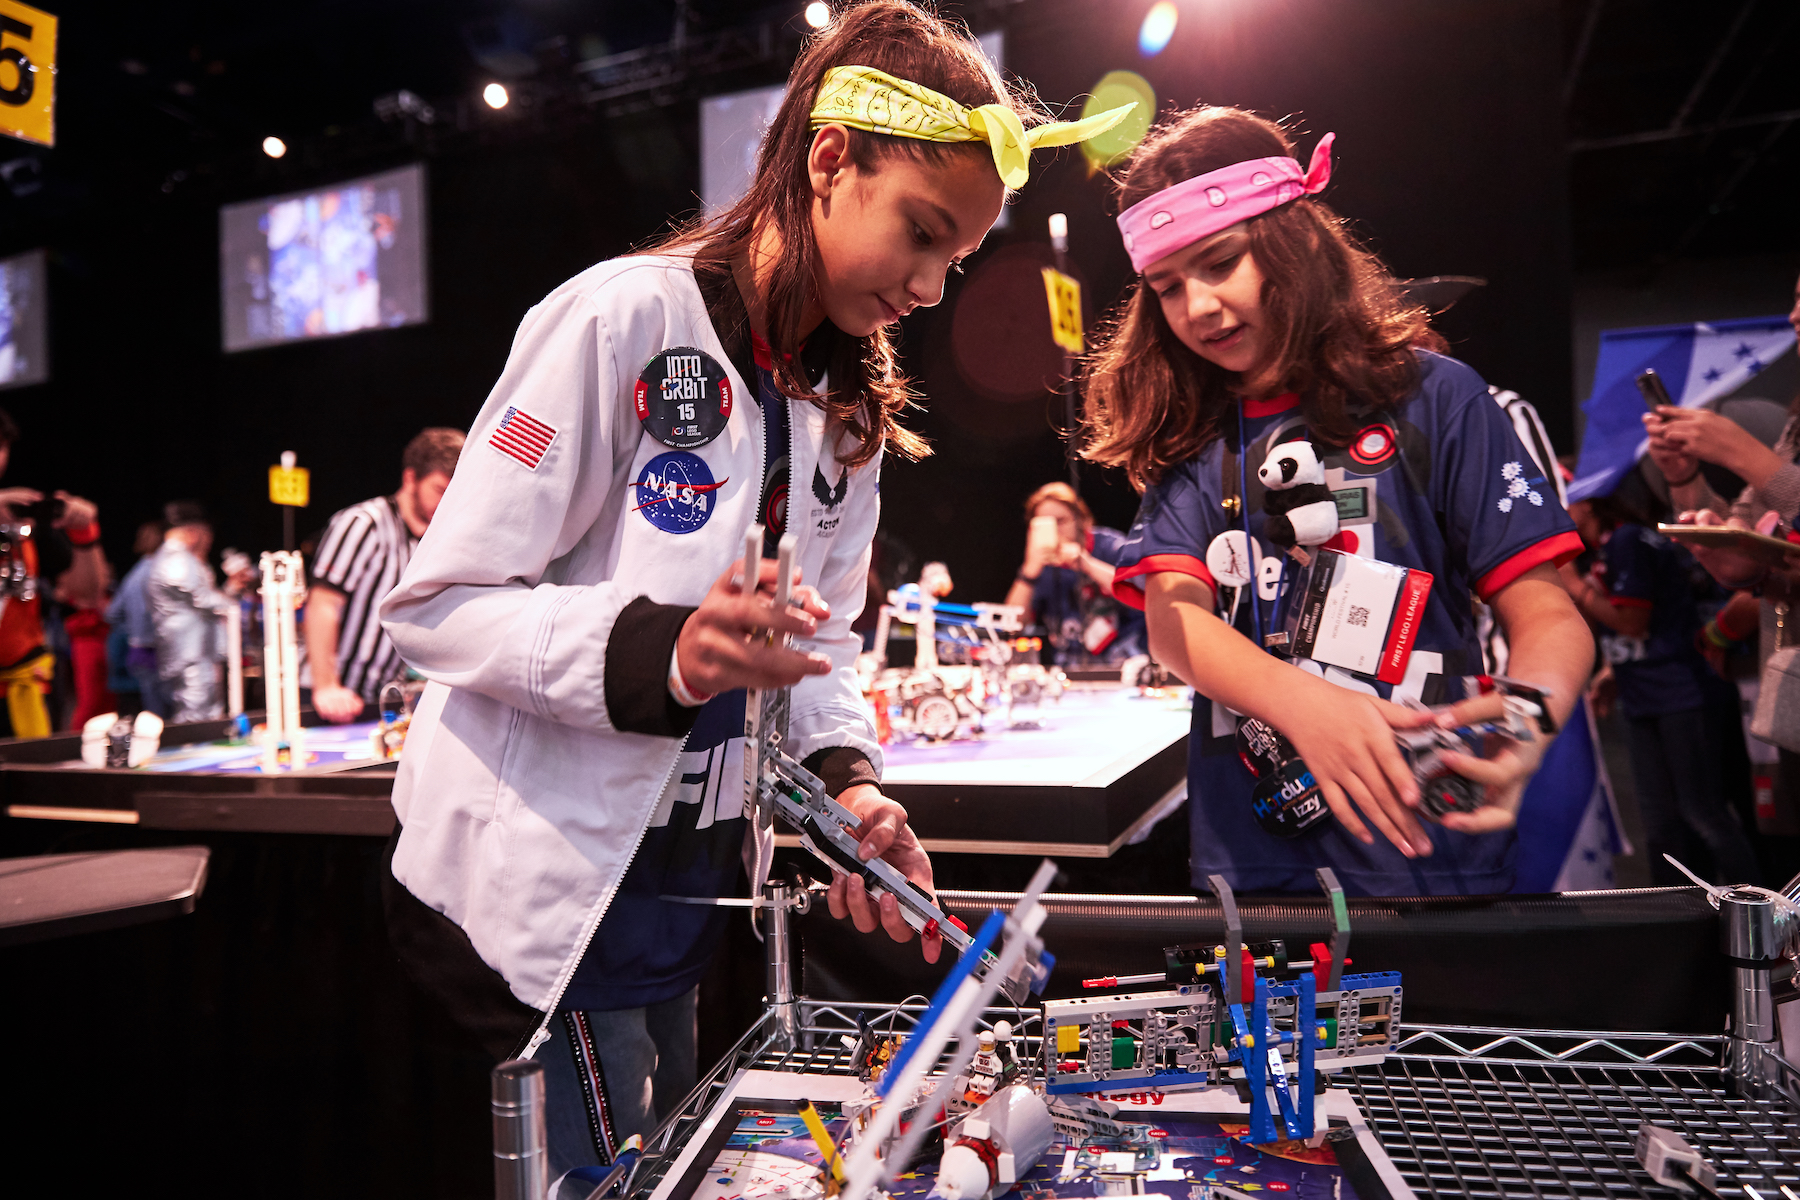 women in electronics robotics competition